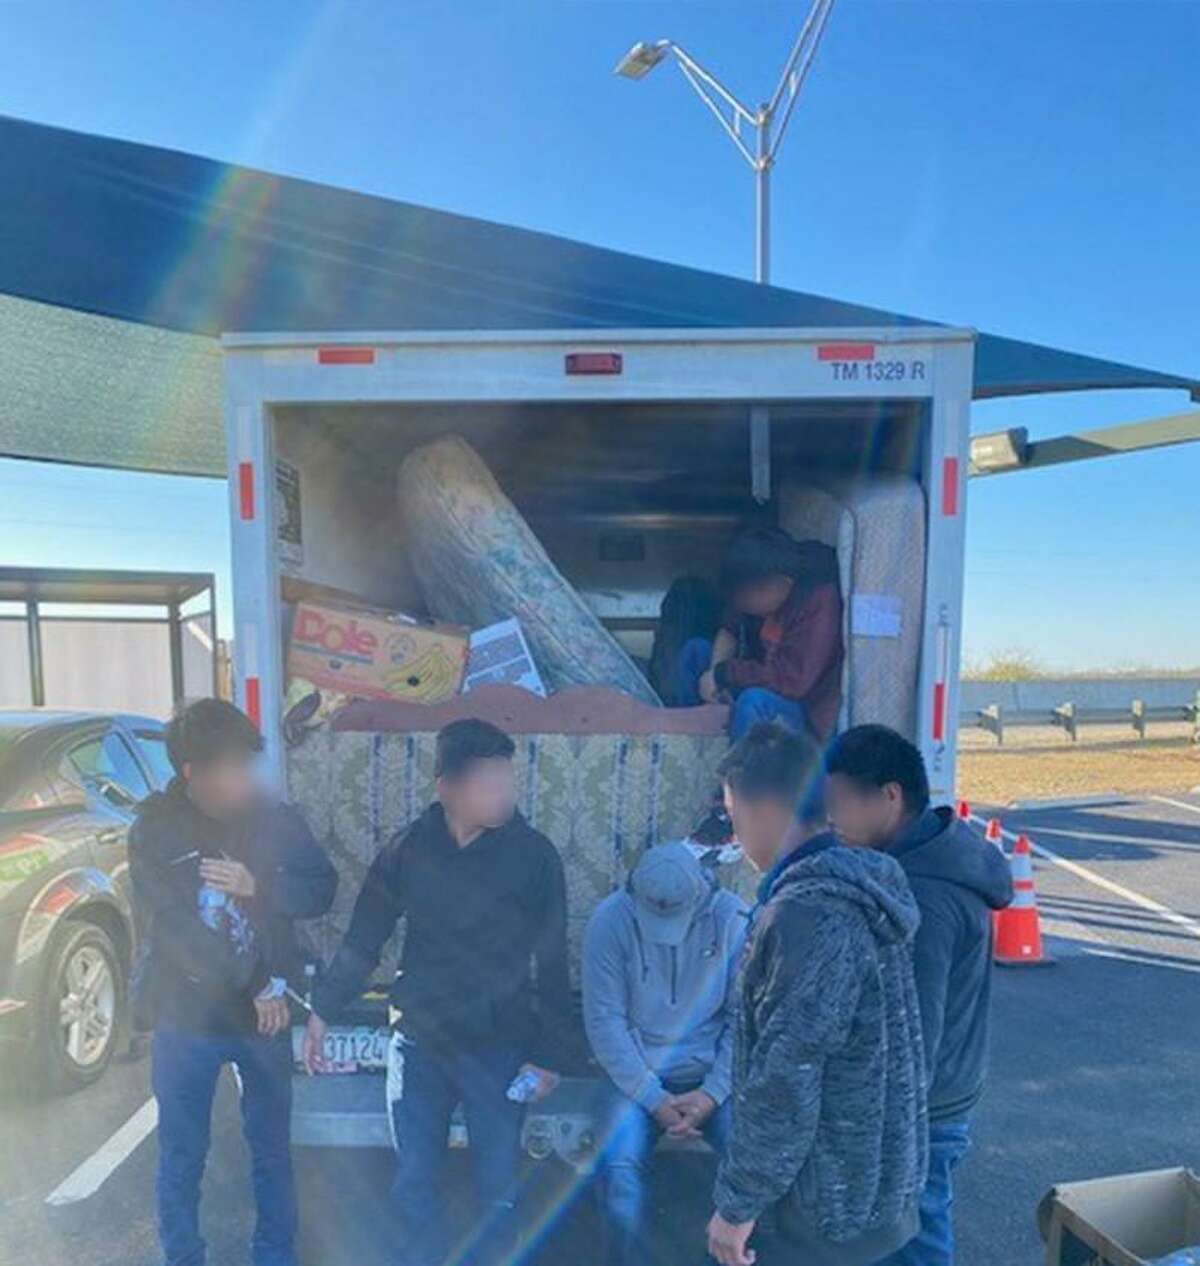 These individuals were discovered in the cargo area of a U-Haul. U.S. Border Patrol agents determined that the people were immigrants from Guatemala who were in the country illegally.